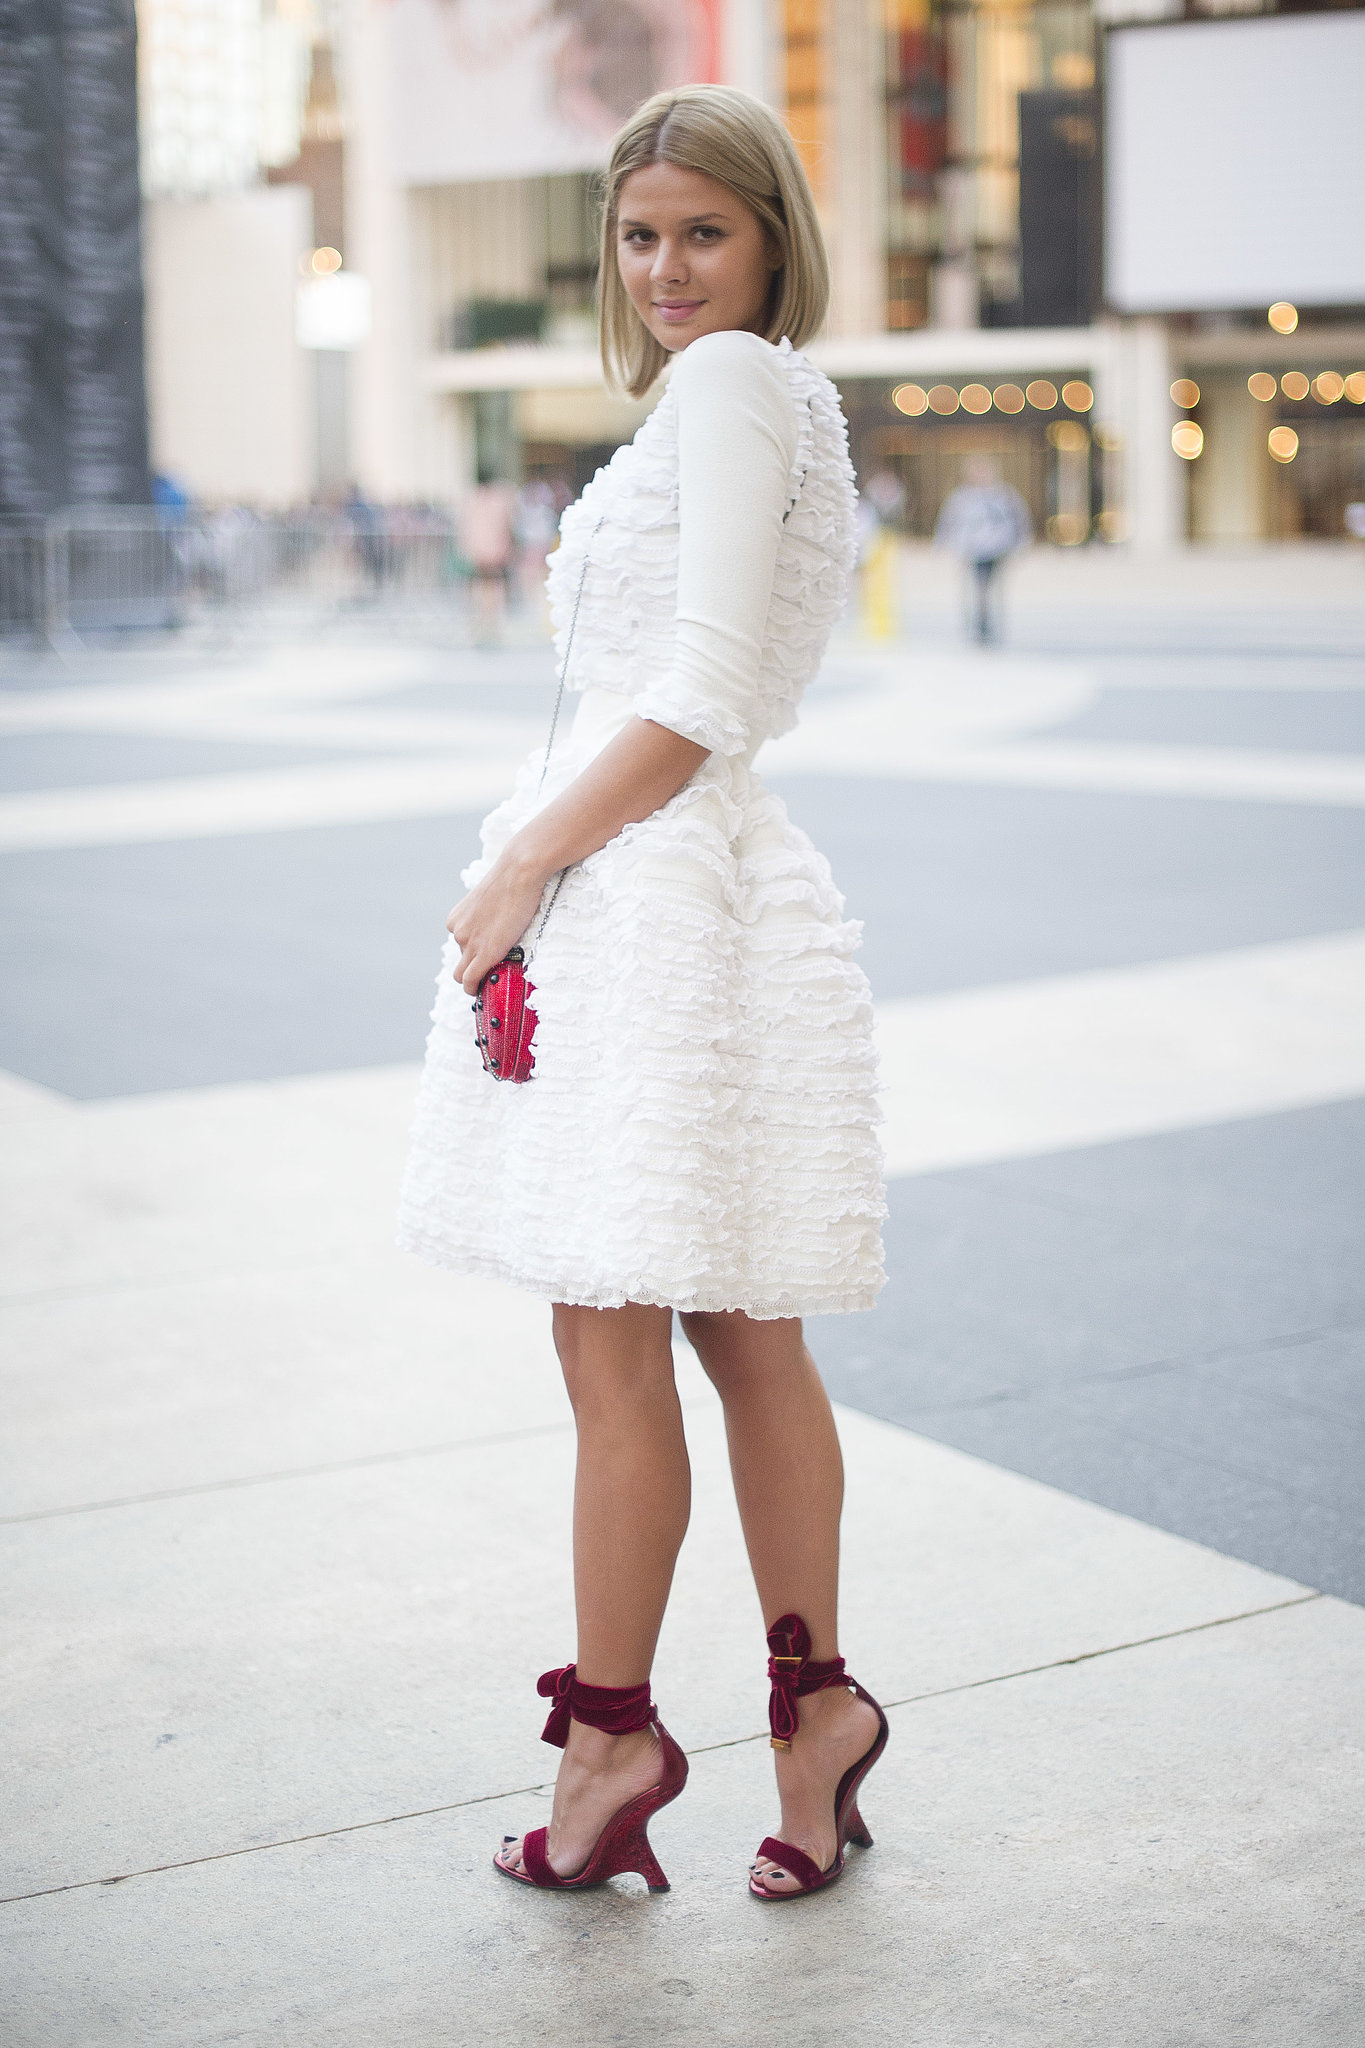 Only the best for Lincoln Center — this showgoer slipped into a frilly white dress and bow-tied heels. 
